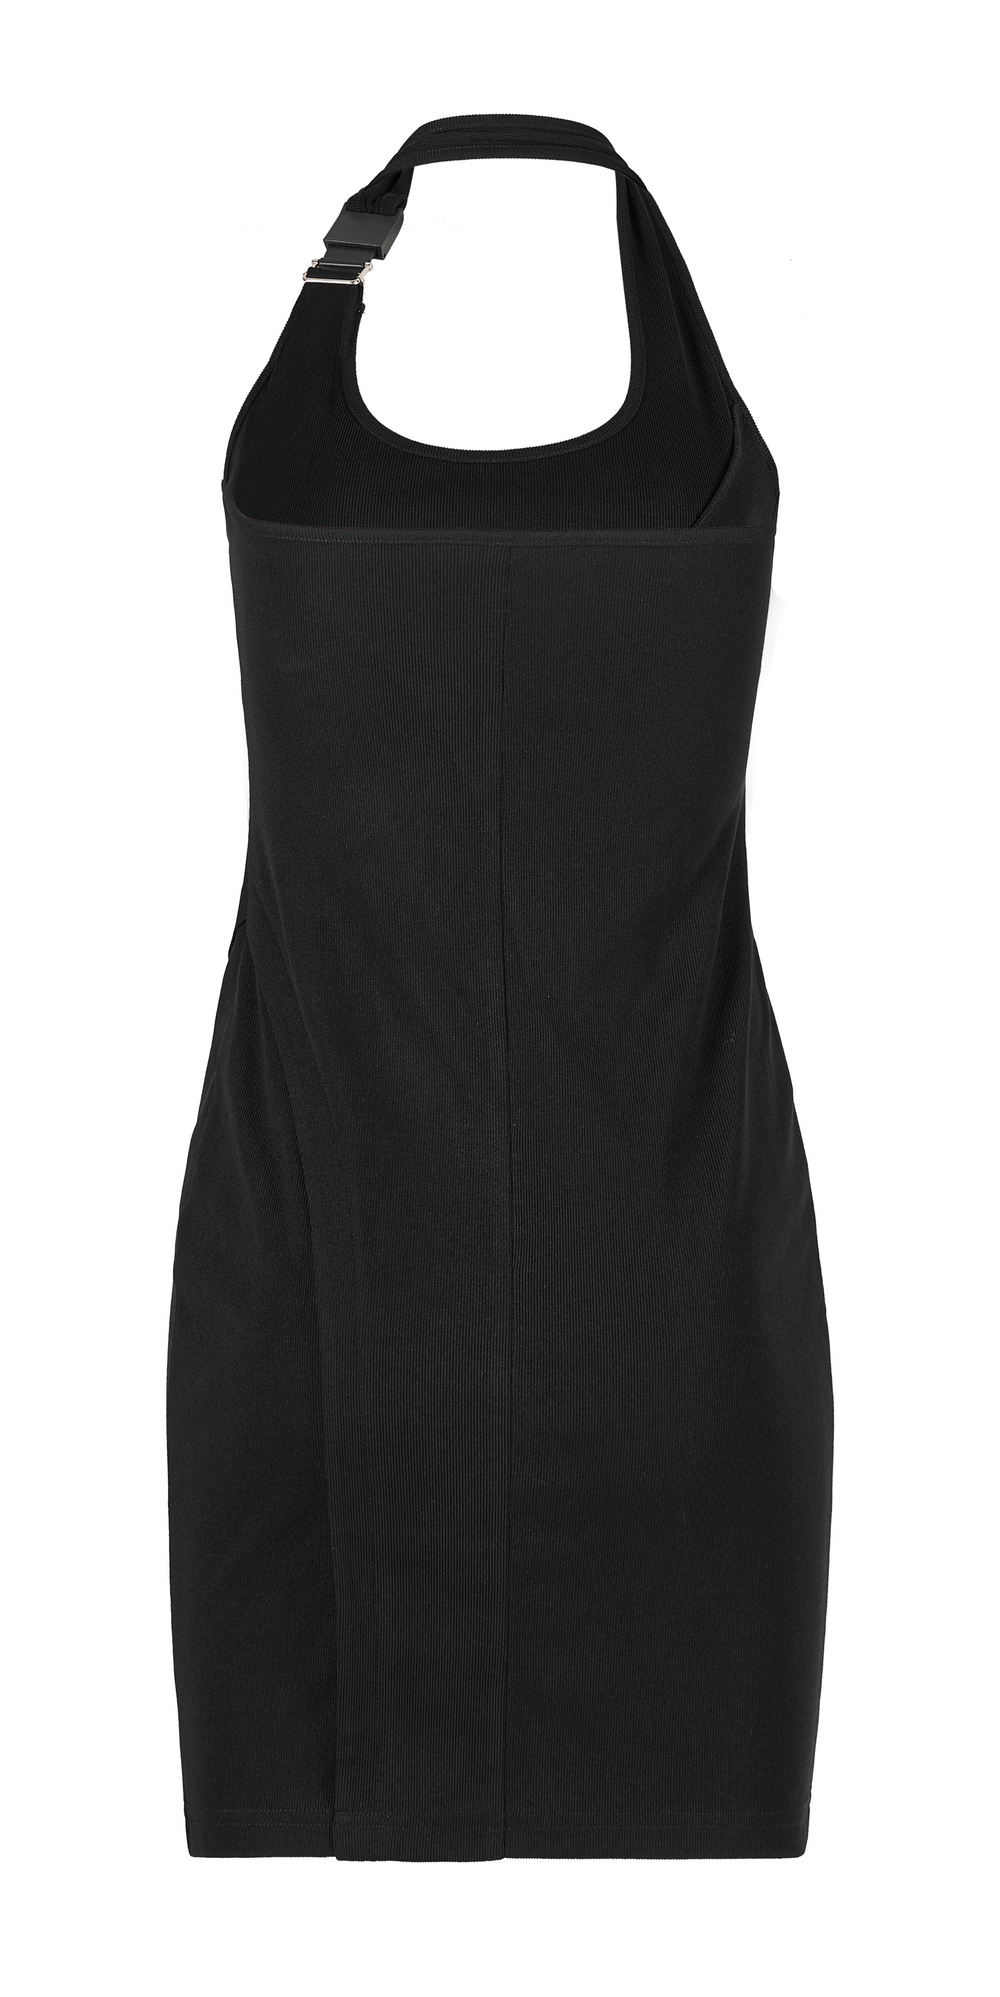 Chic Black Halter Dress with Buckle and 3D Detail